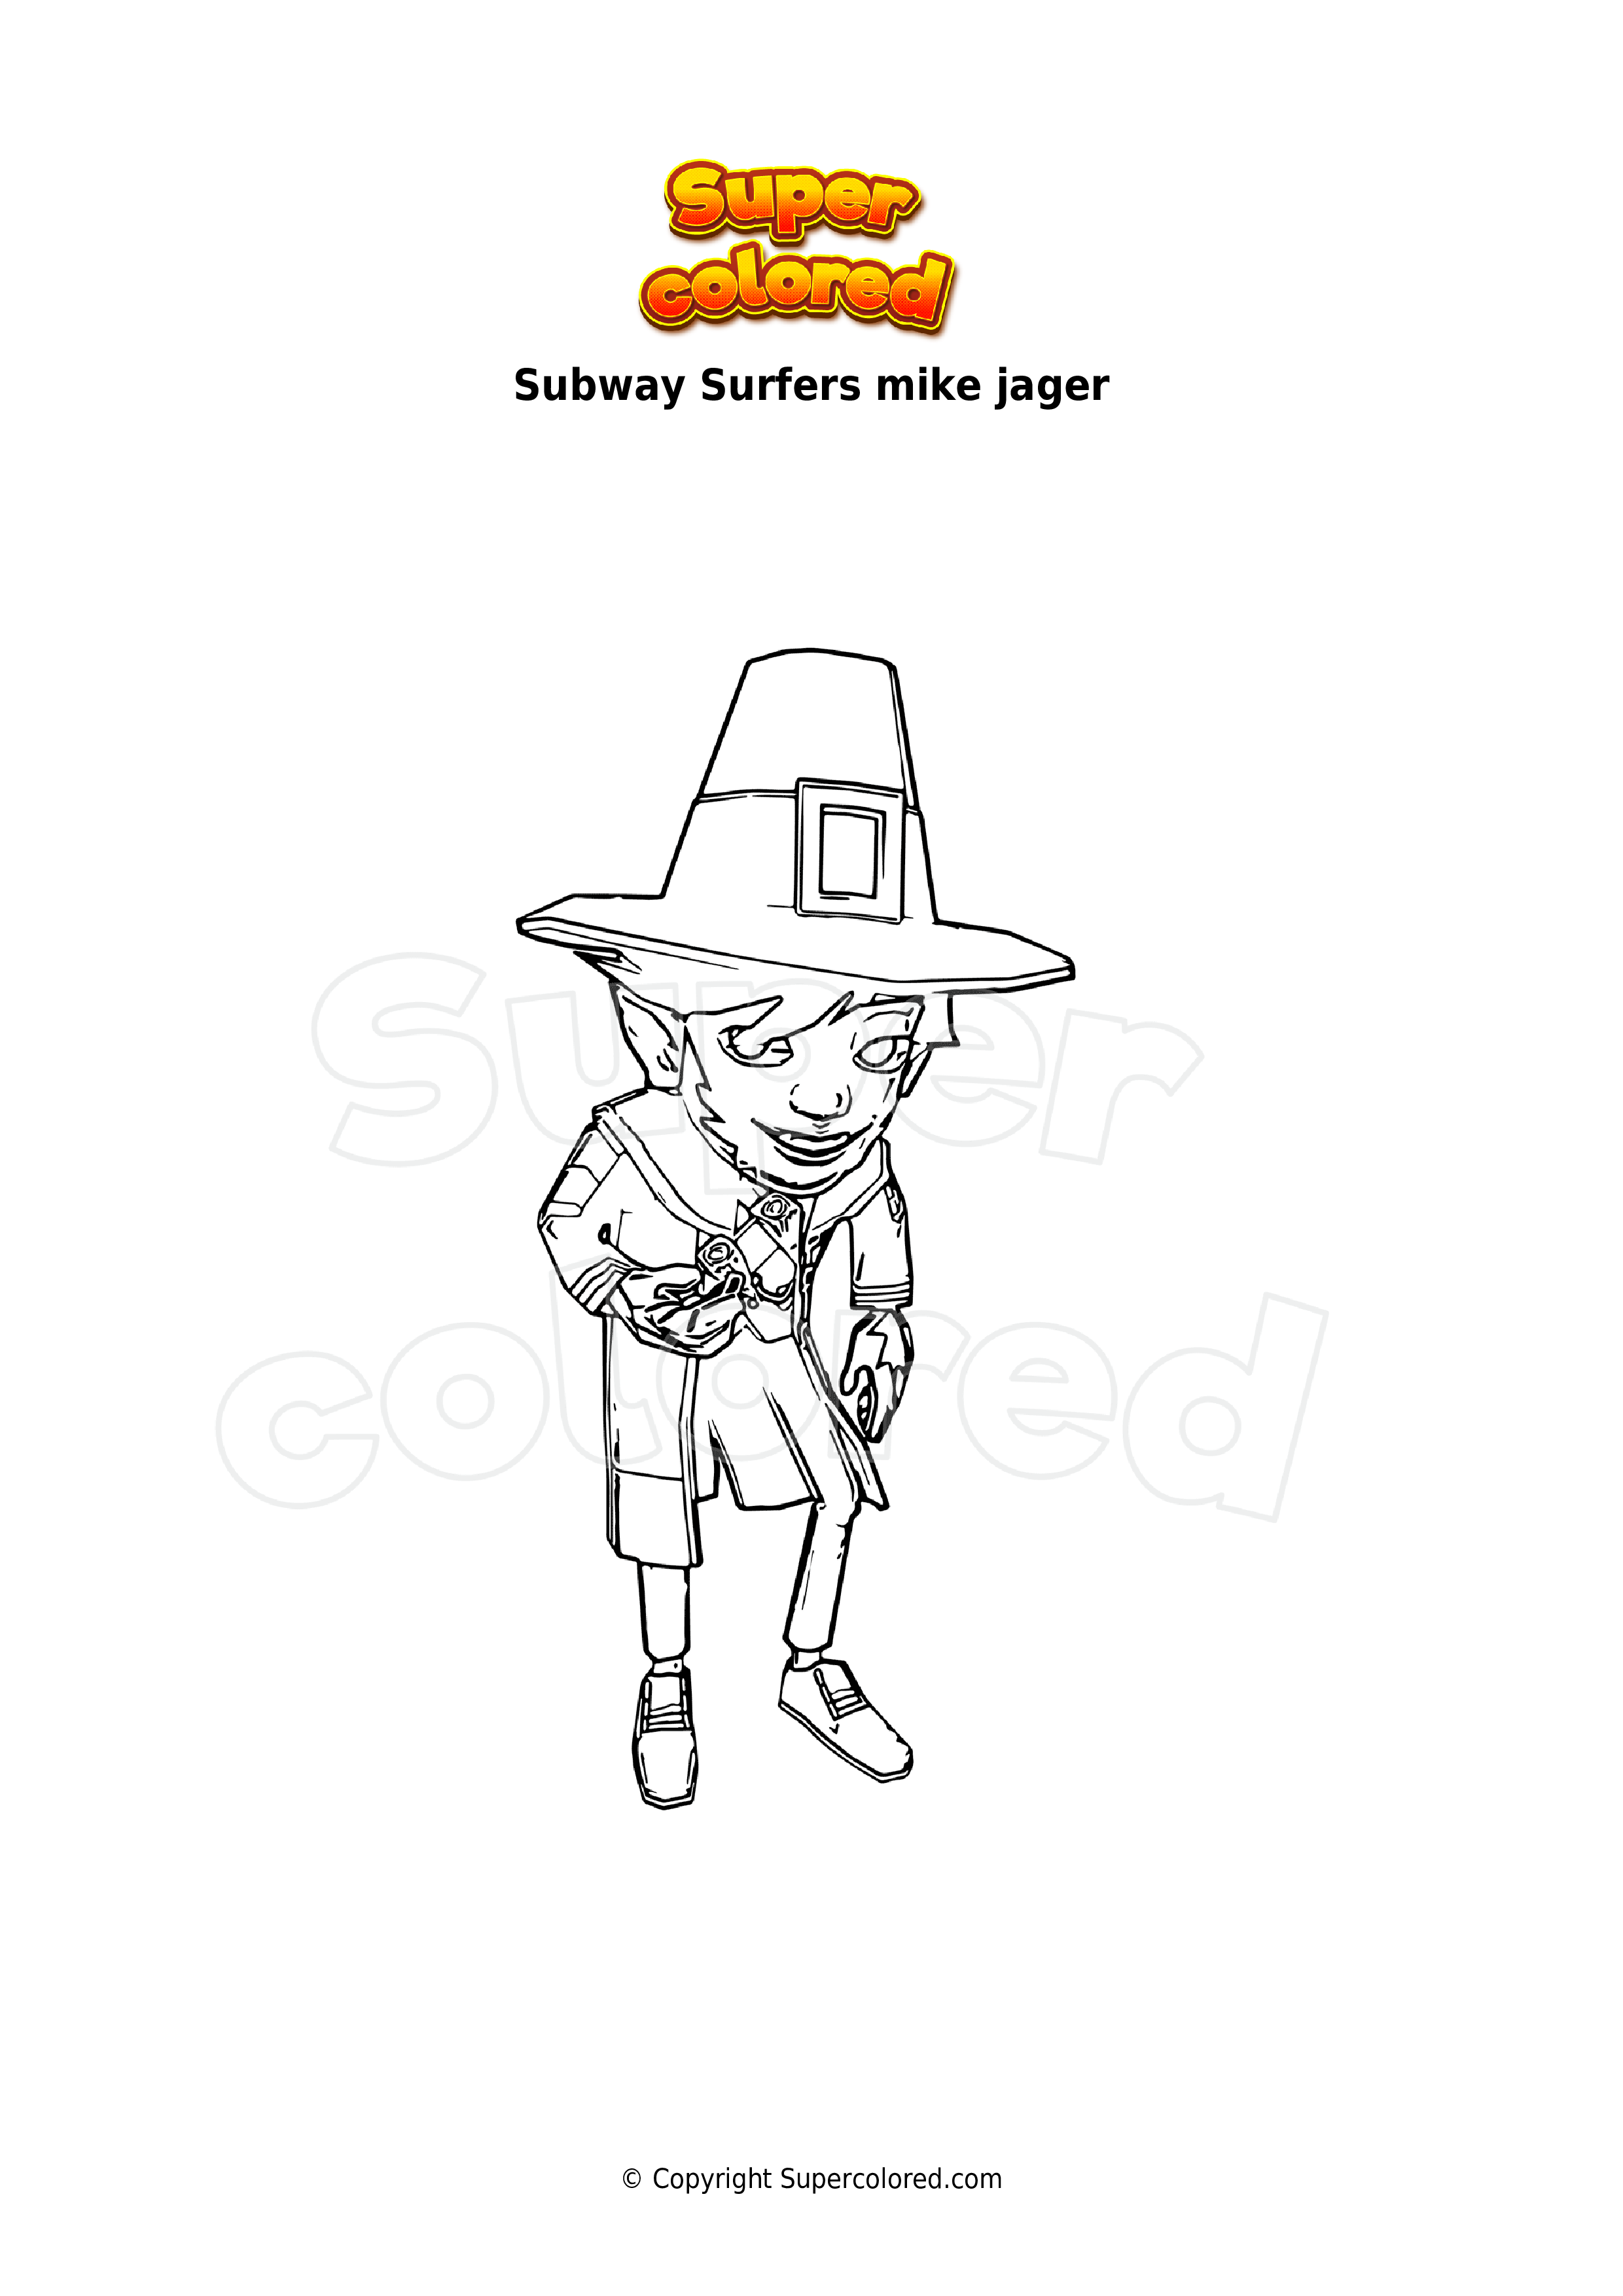 Coloring page Subway Surfers mike jager - Supercolored.com